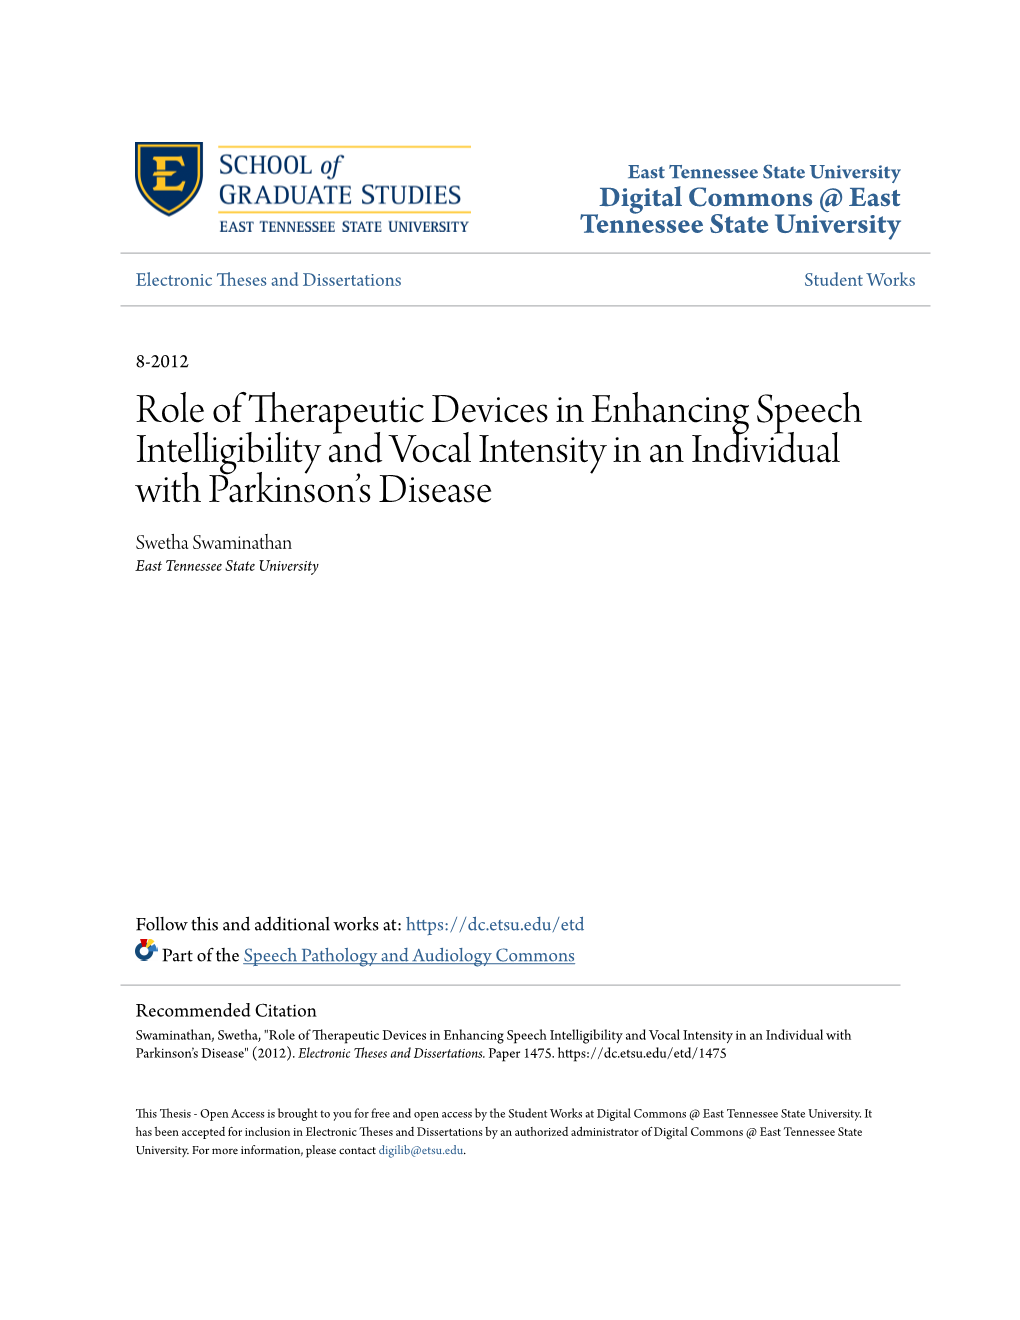 Role of Therapeutic Devices in Enhancing Speech Intelligibility And